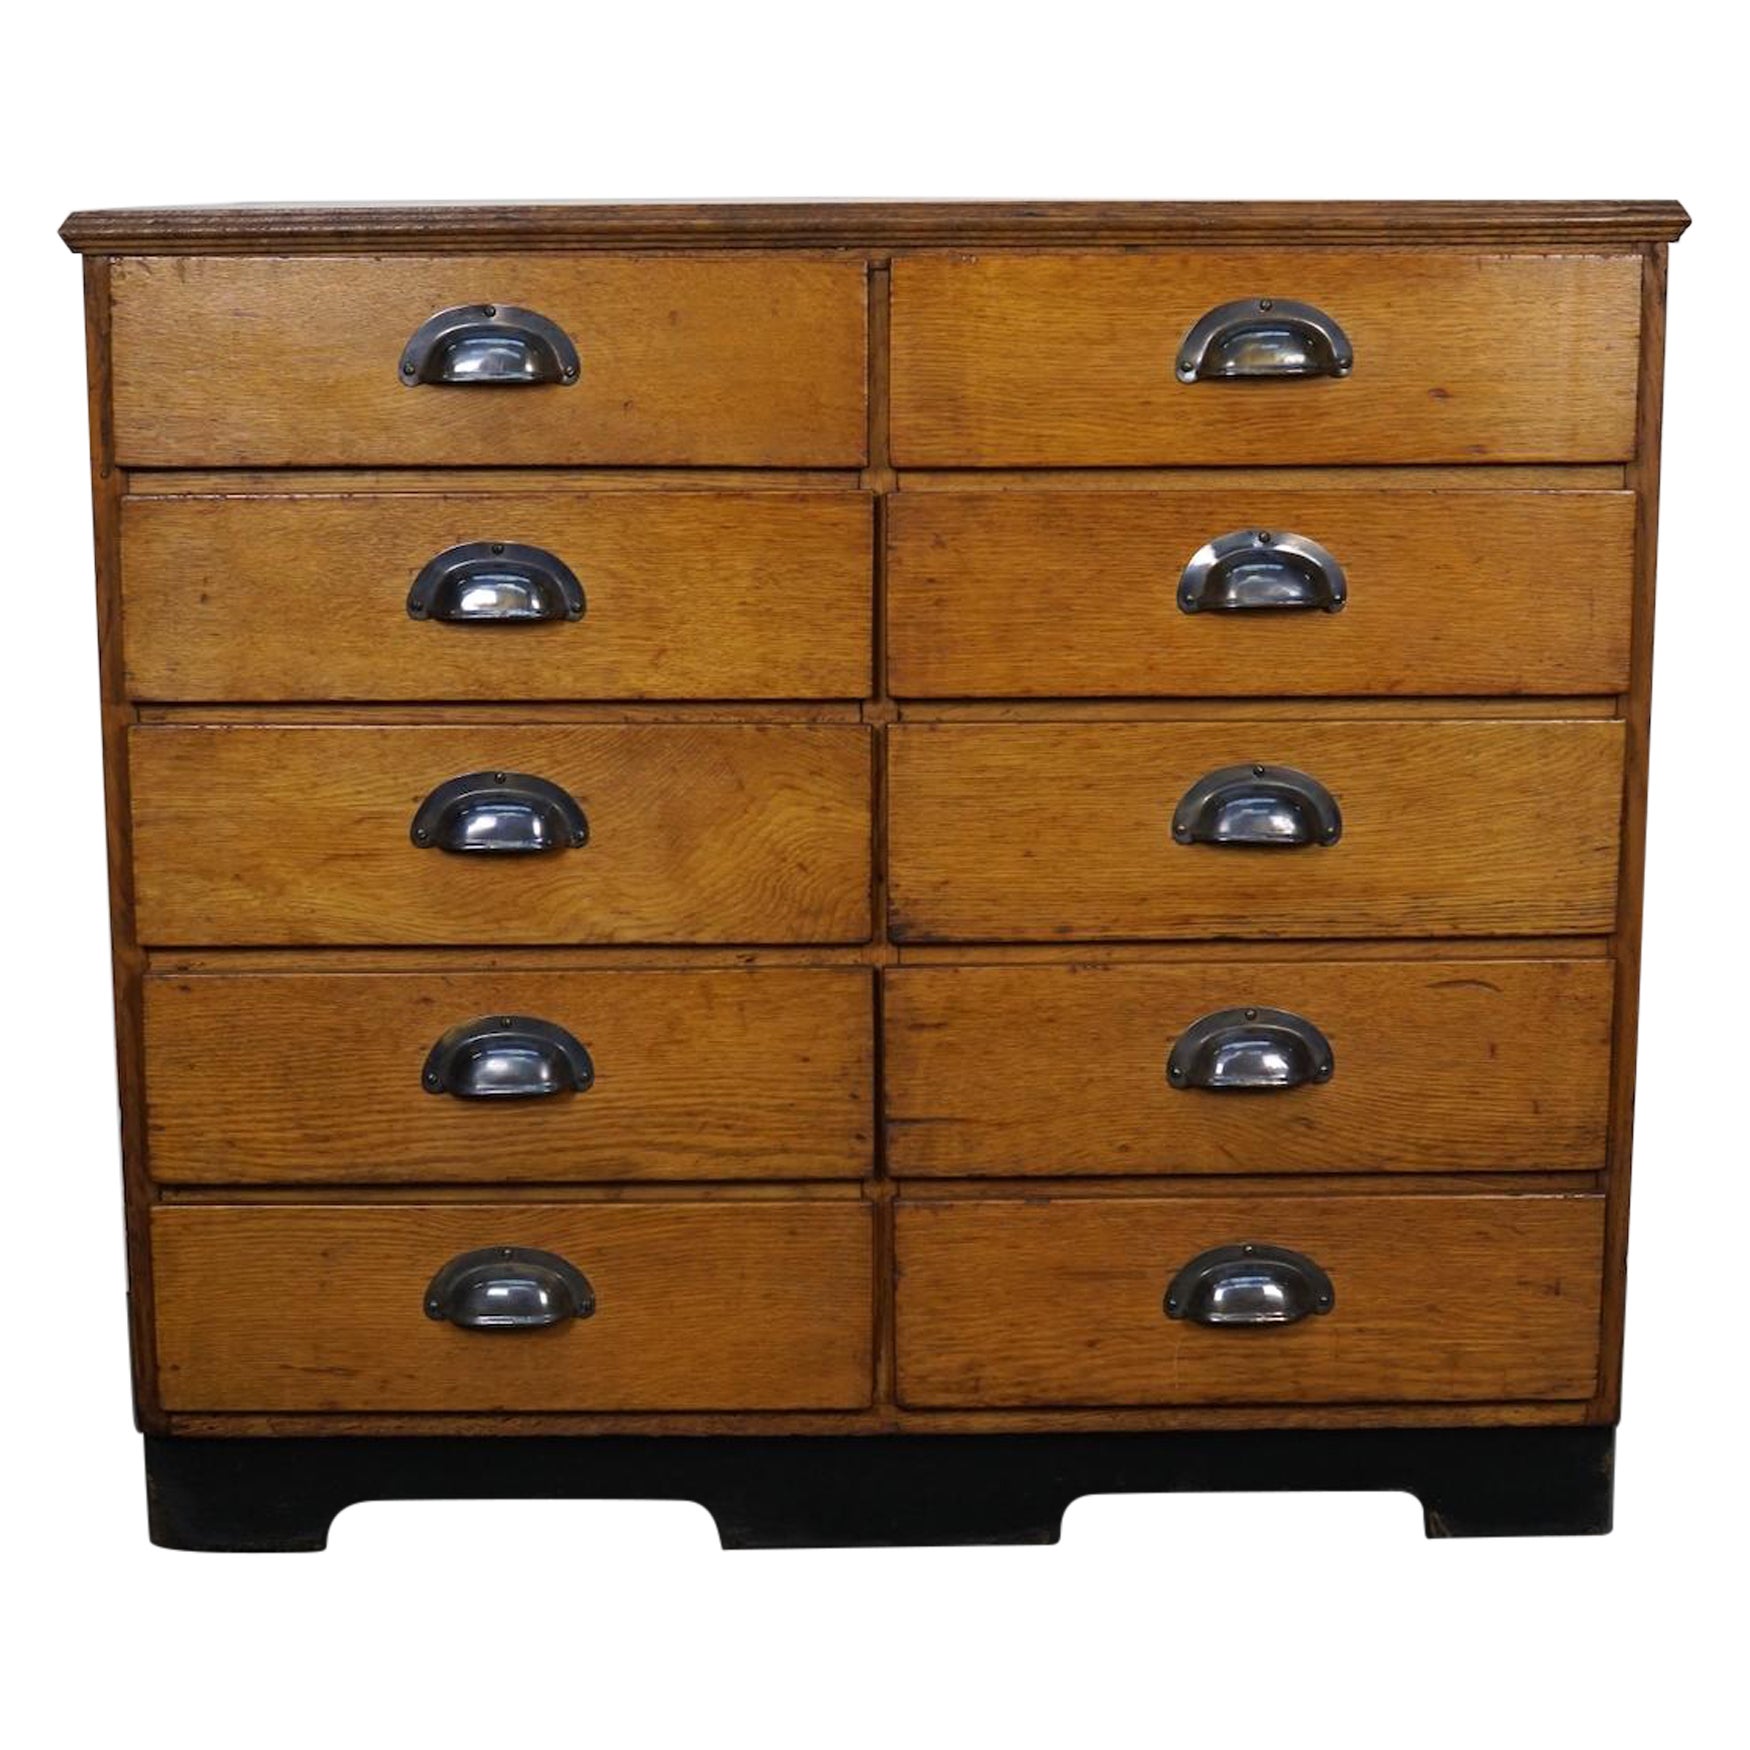 German Oak / Pine Apothecary Cabinet or Bank of Drawers, Mid-20th Century For Sale